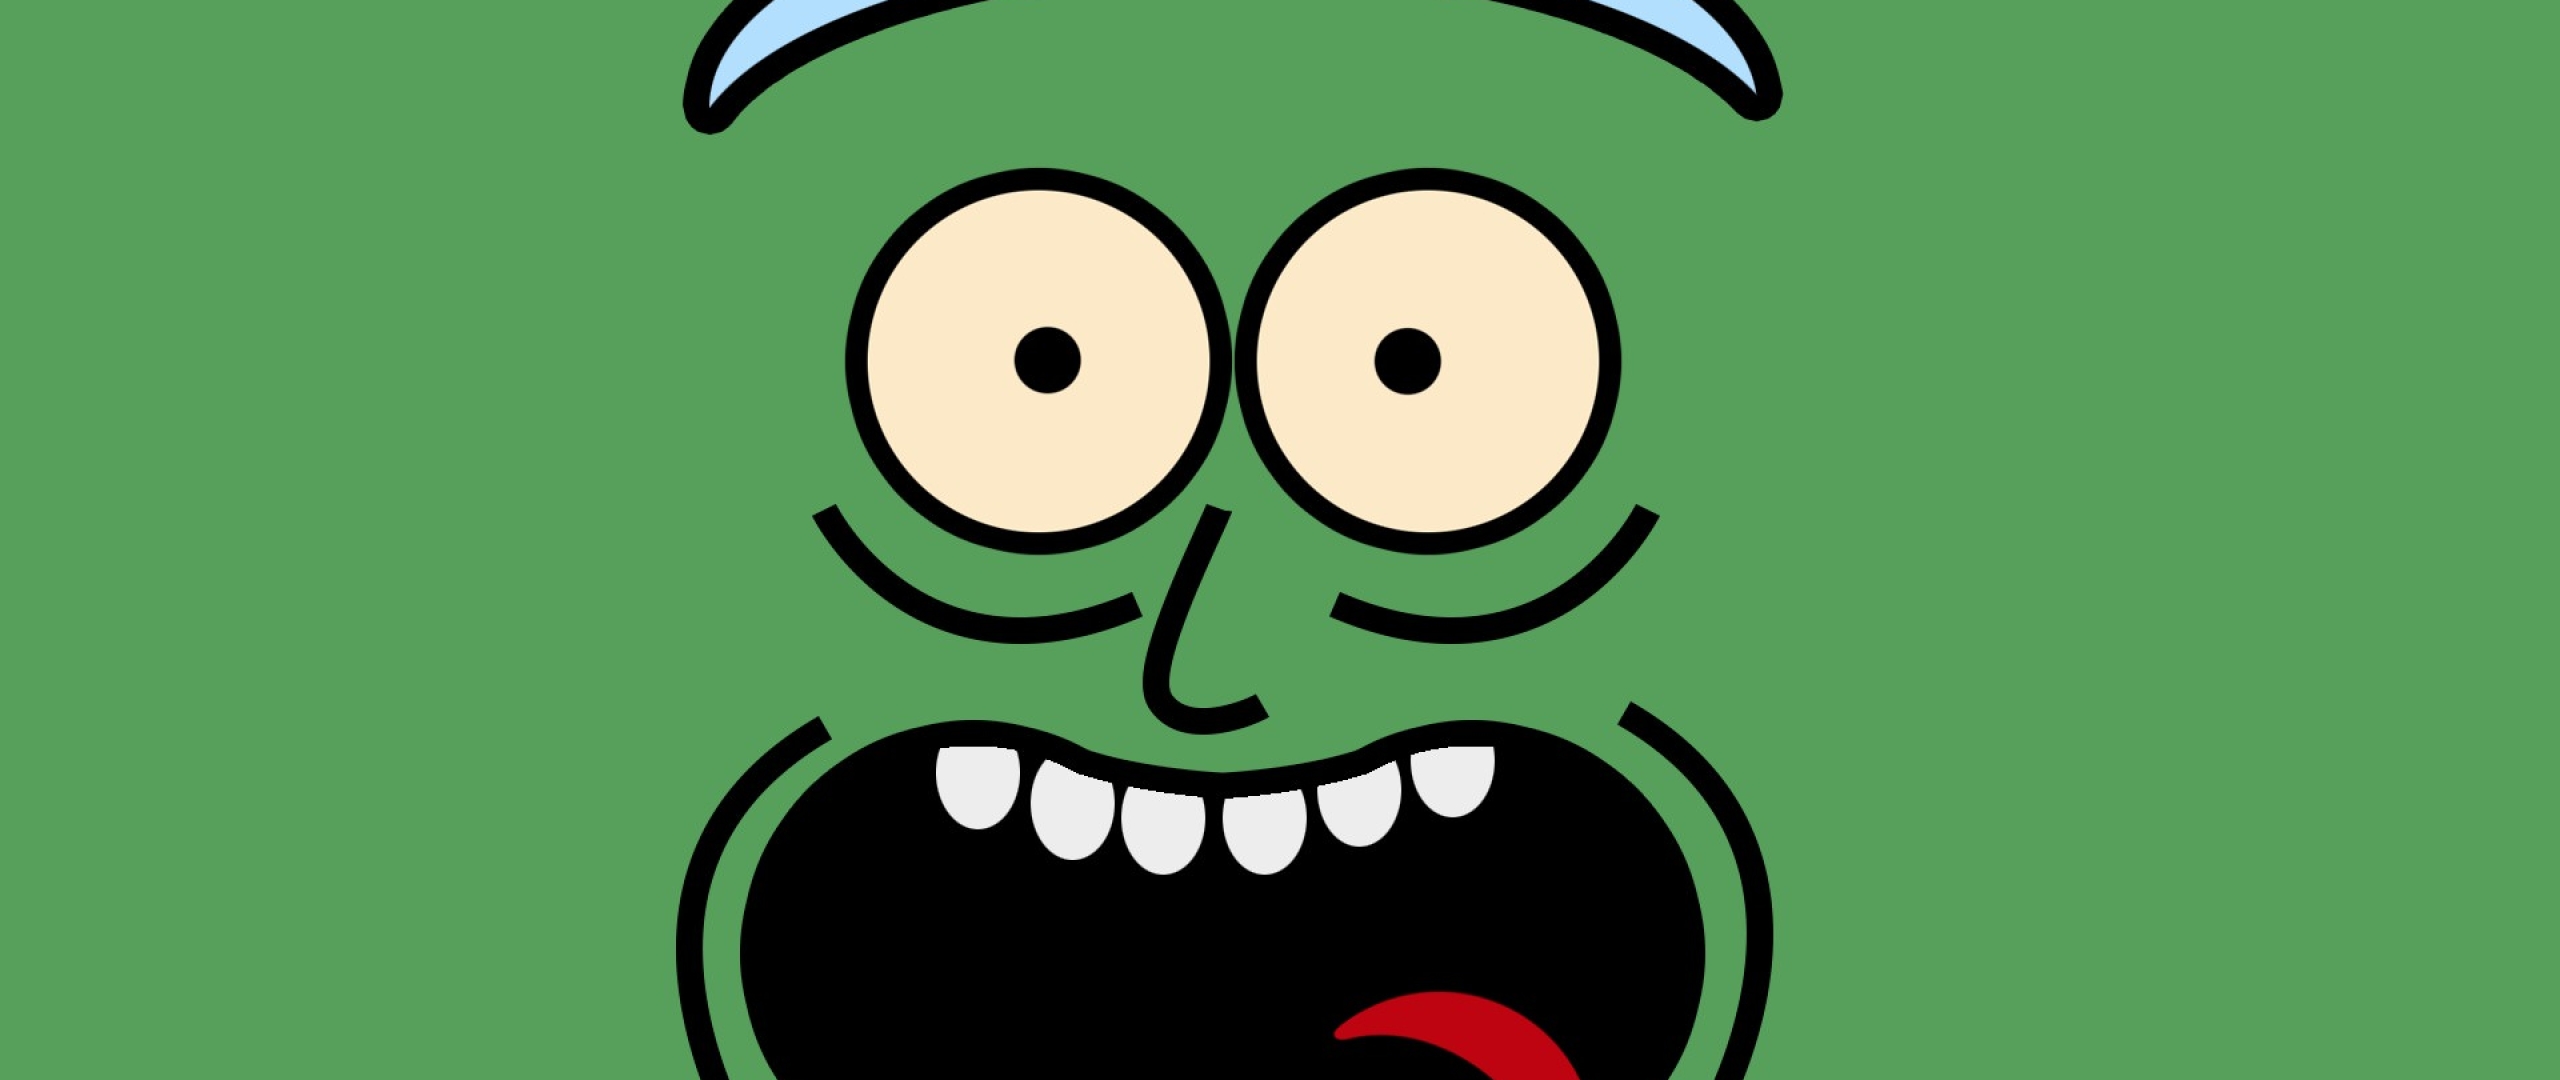 rick and morty vector_60518_2560x1080